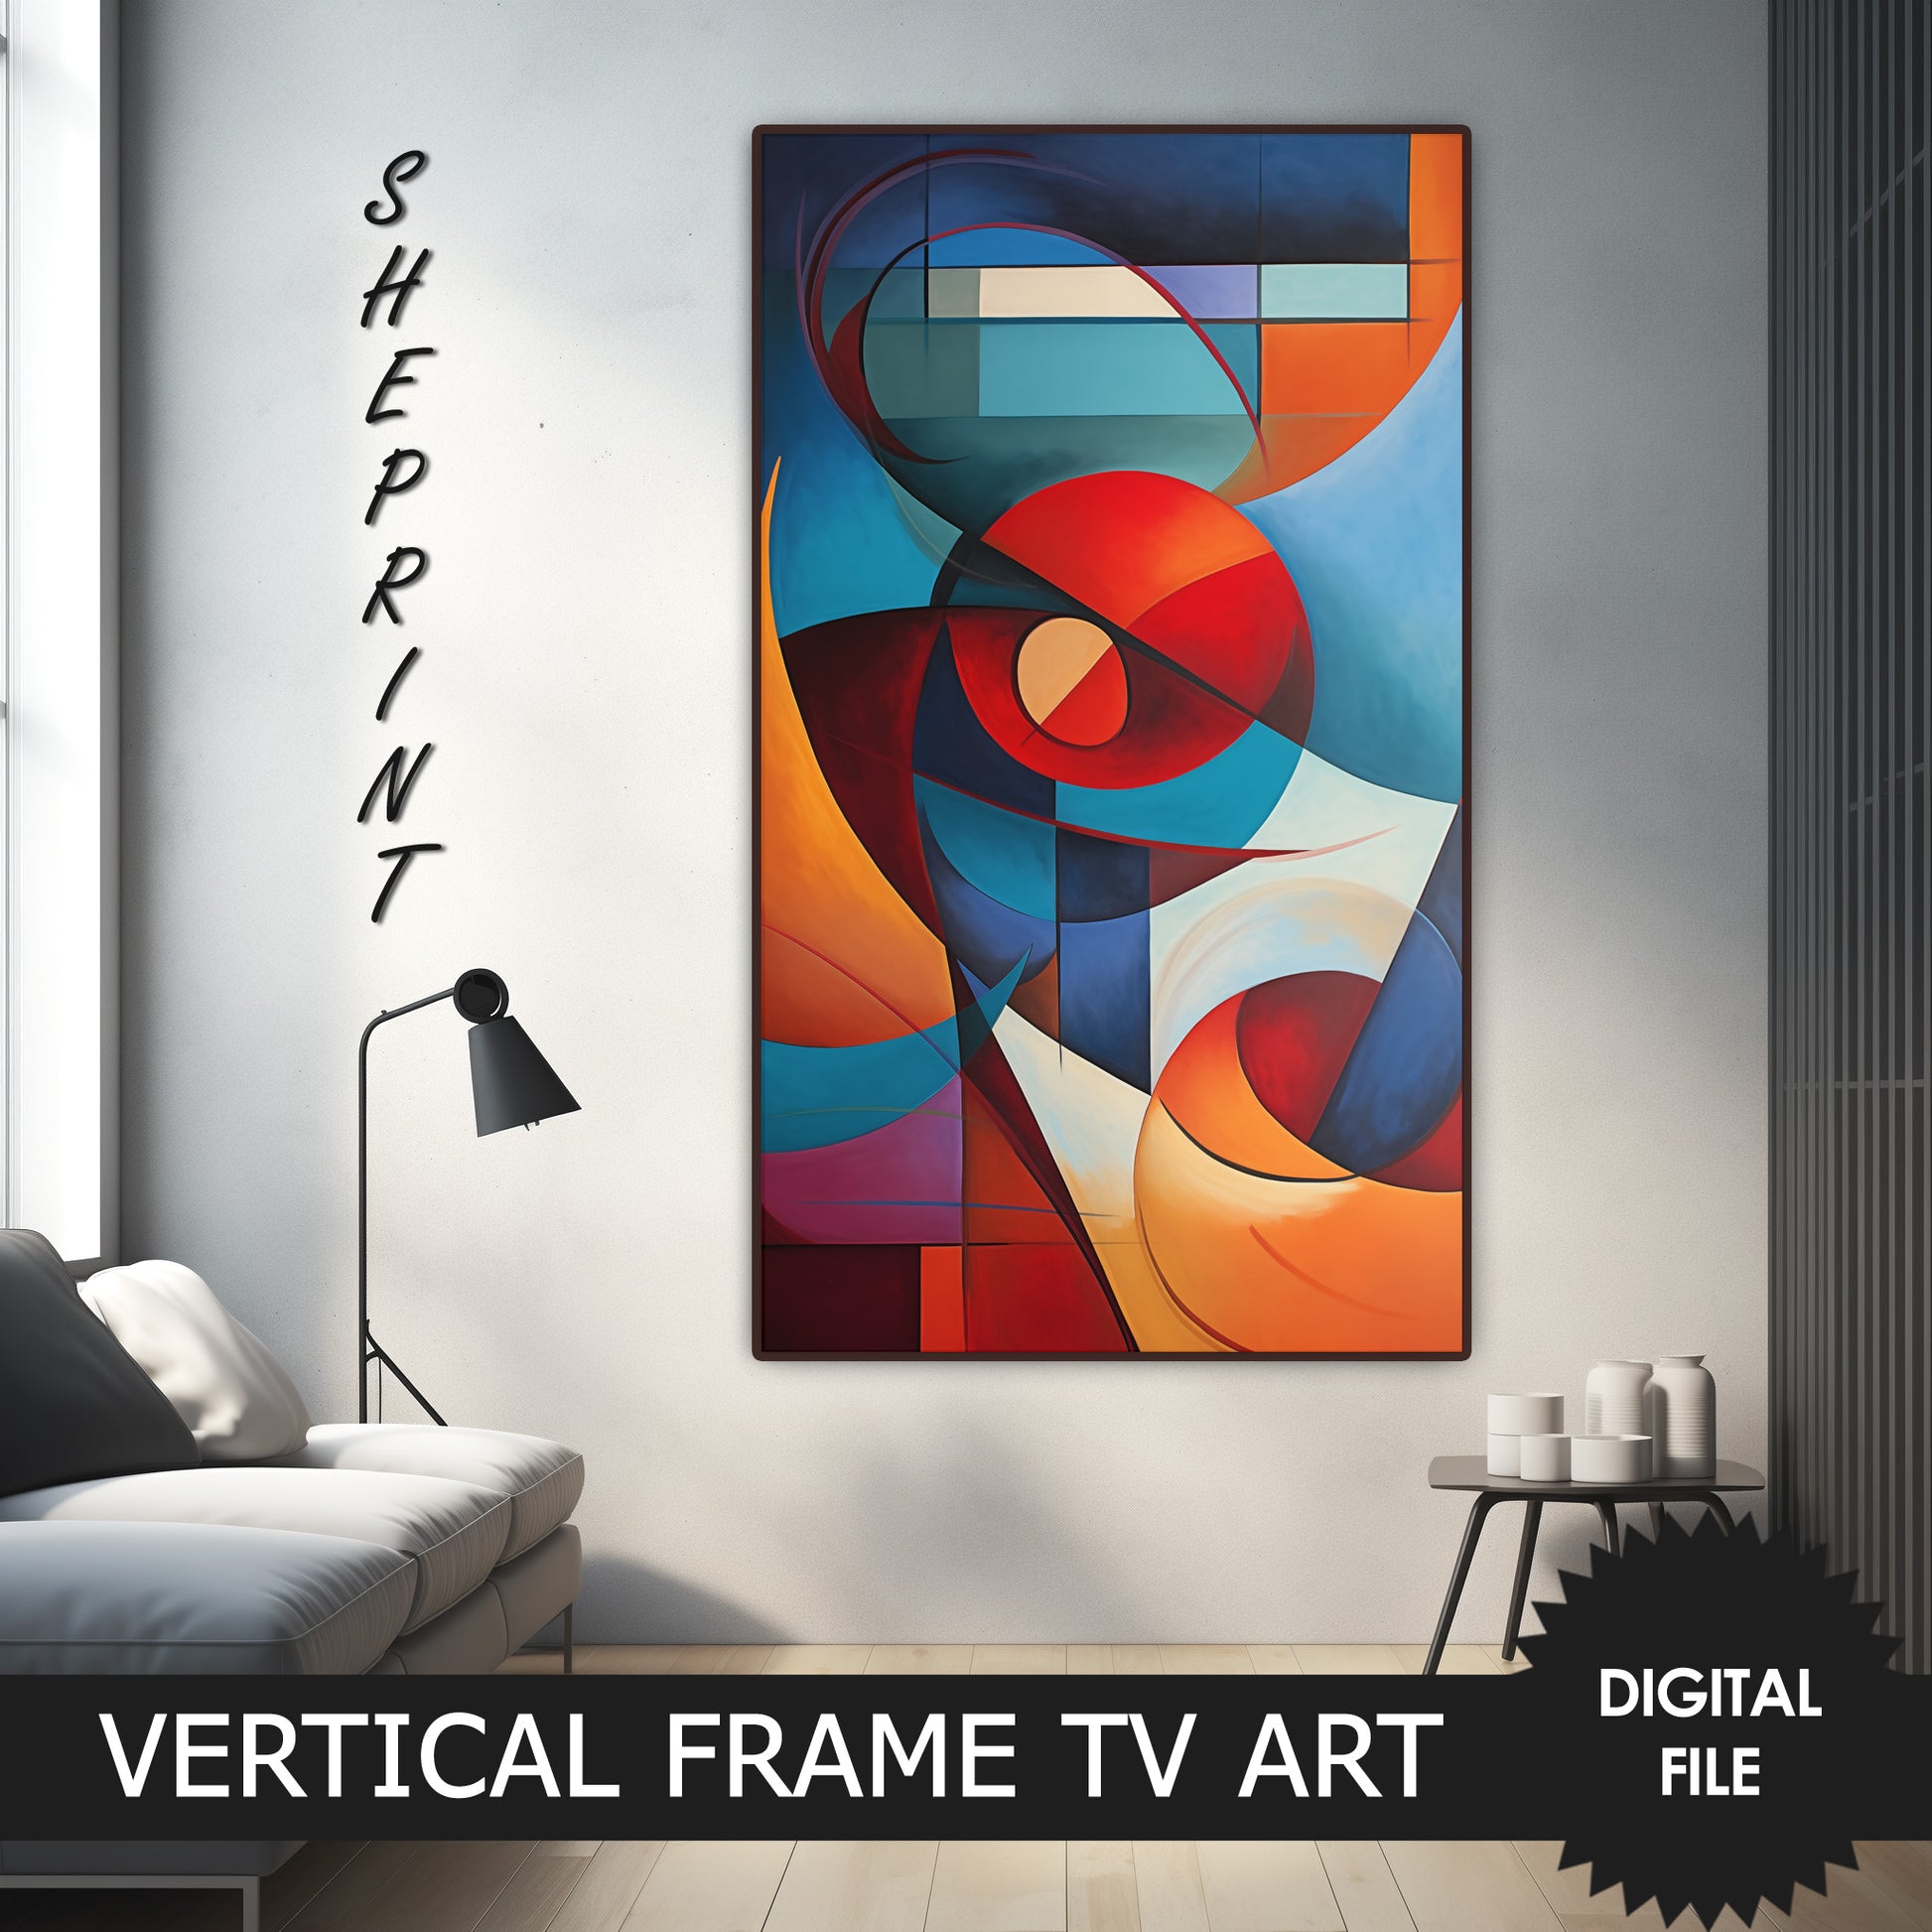 Vertical & Horizontal Frame TV Art, Curvy Shapes Abstract Art, preview on Samsung Frame Tv when mounted vertically